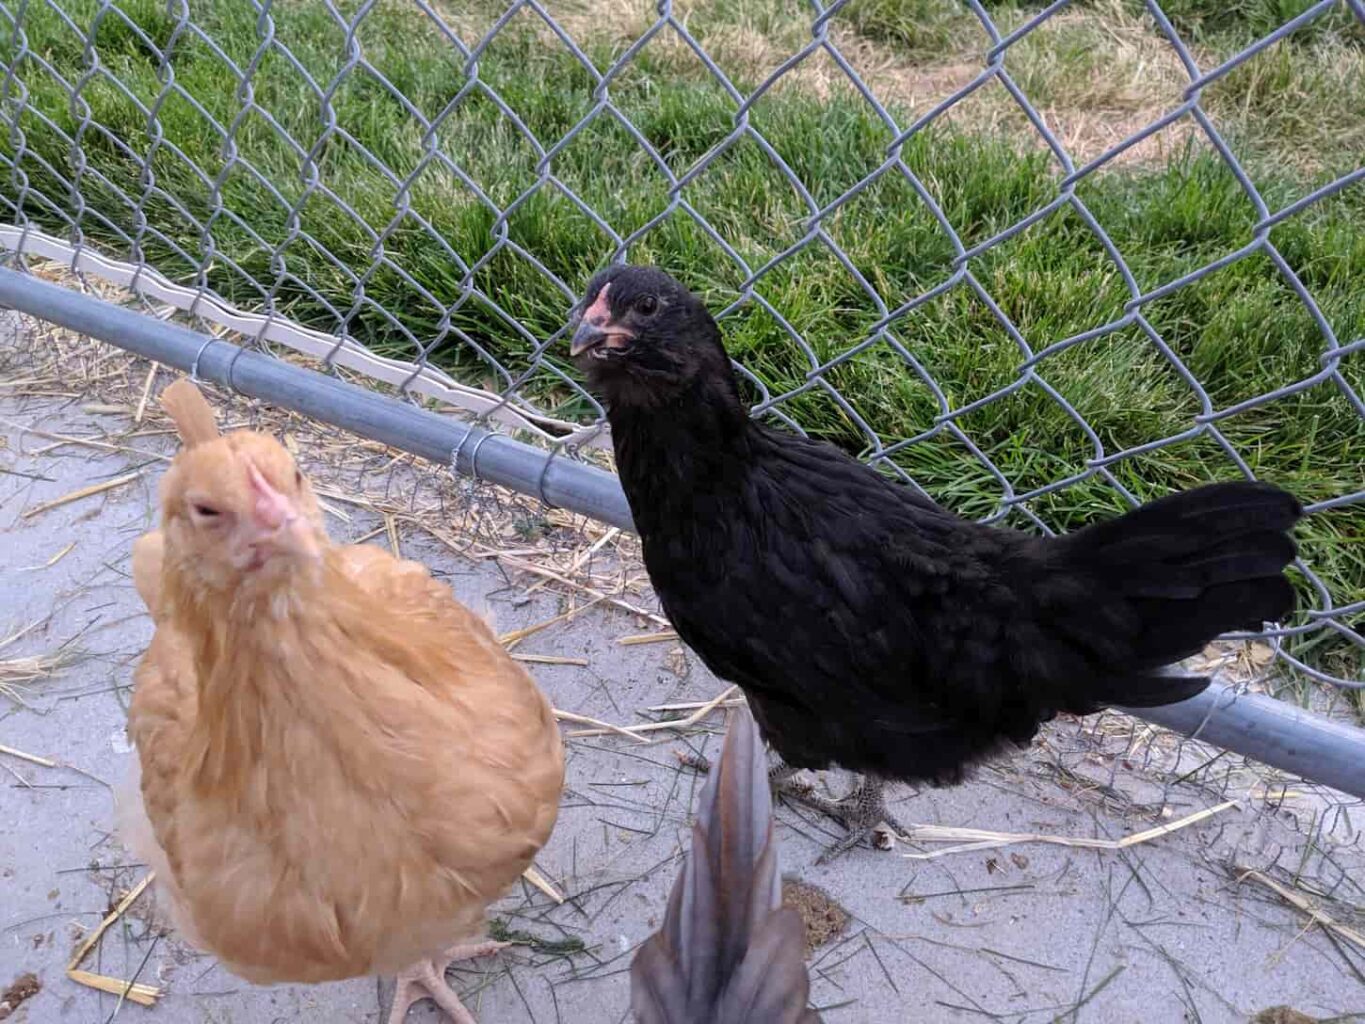 An image of two chickens (one buff Orpington and one black Easter Egger) in a chicken coop made from a dog run. The Run is lined with a chain-link fence and there is a chicken wire under the fence so it is secure.